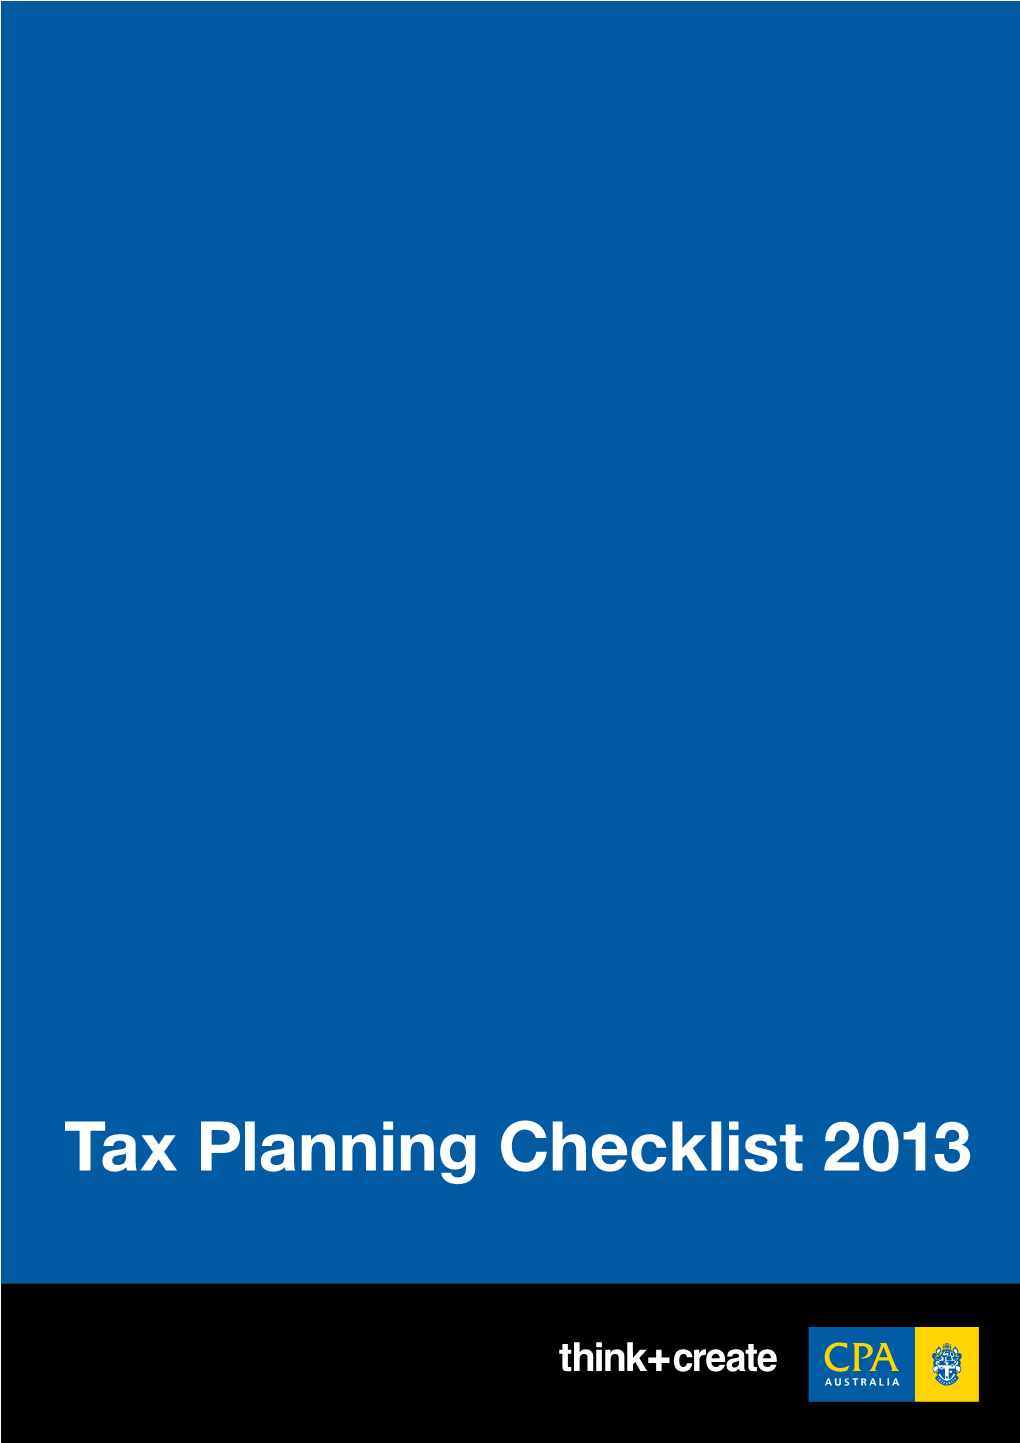 The Following Tax Planning Checklist, Prepared by Moore Stephens on Behalf of CPA Australia